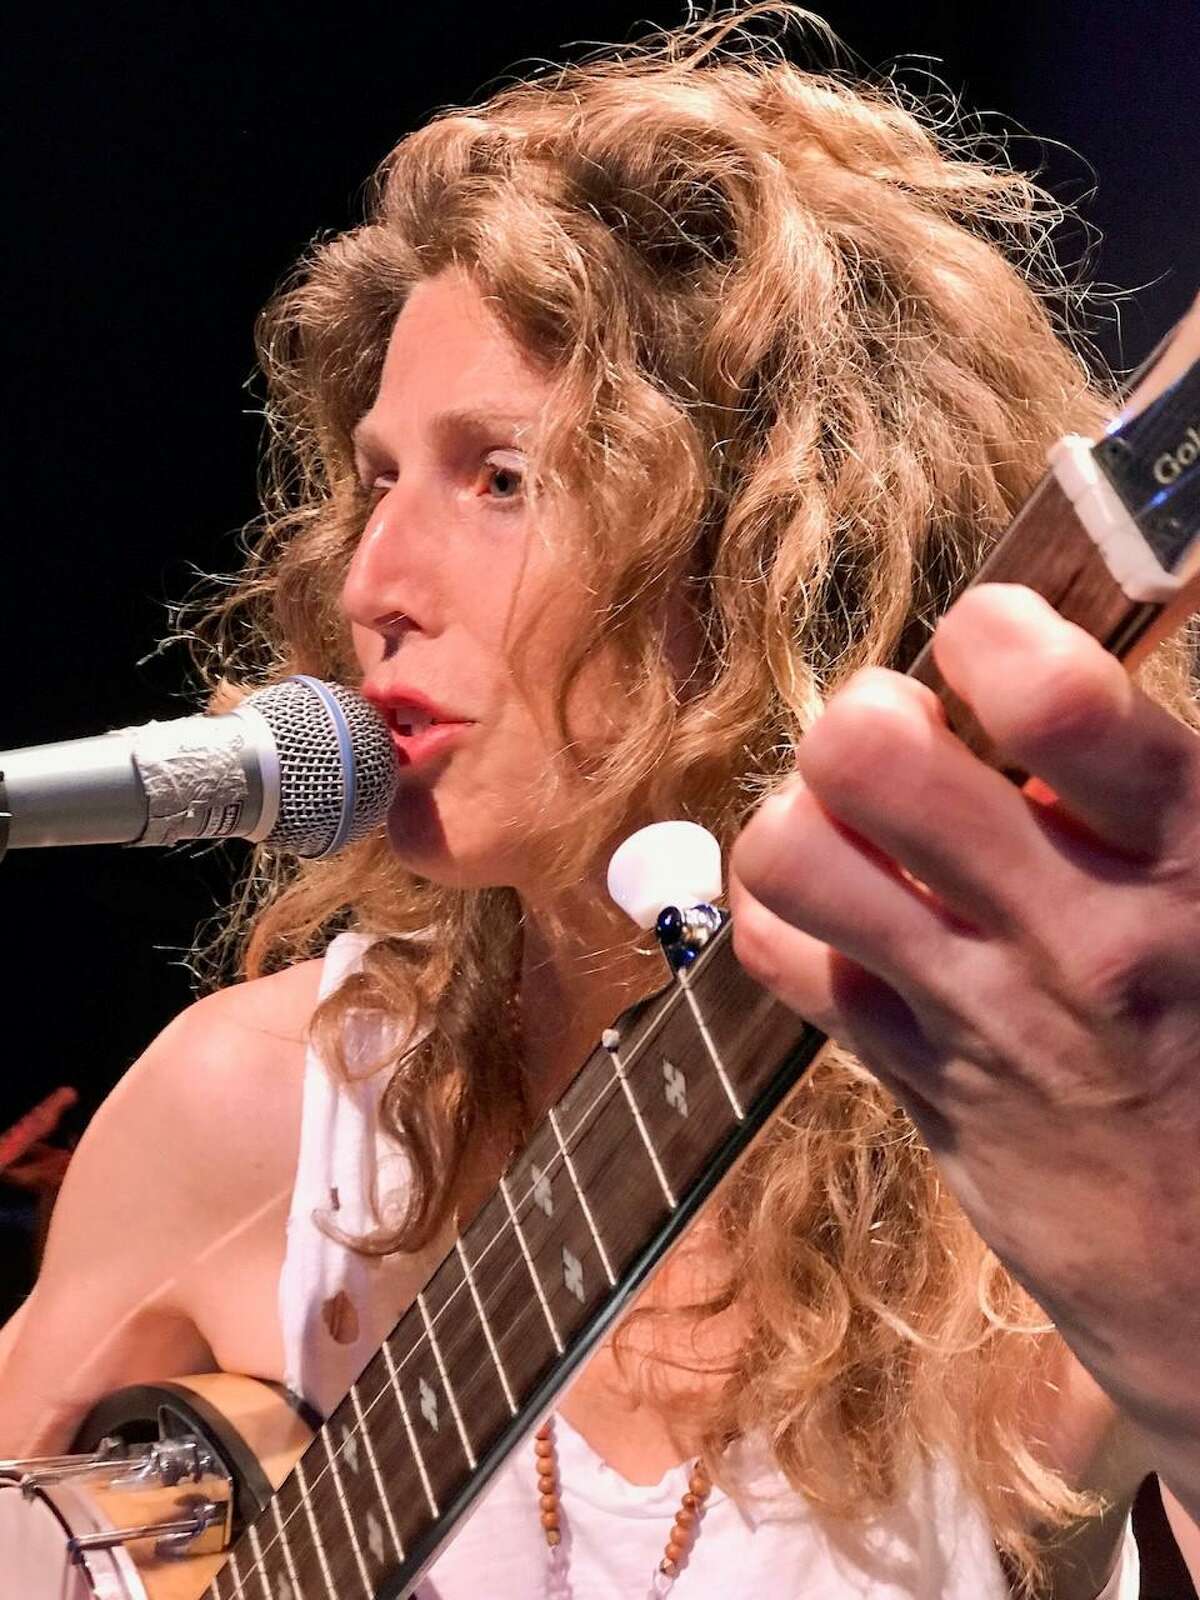 'I go from flower to flower now' Sophie B. Hawkins talks about living